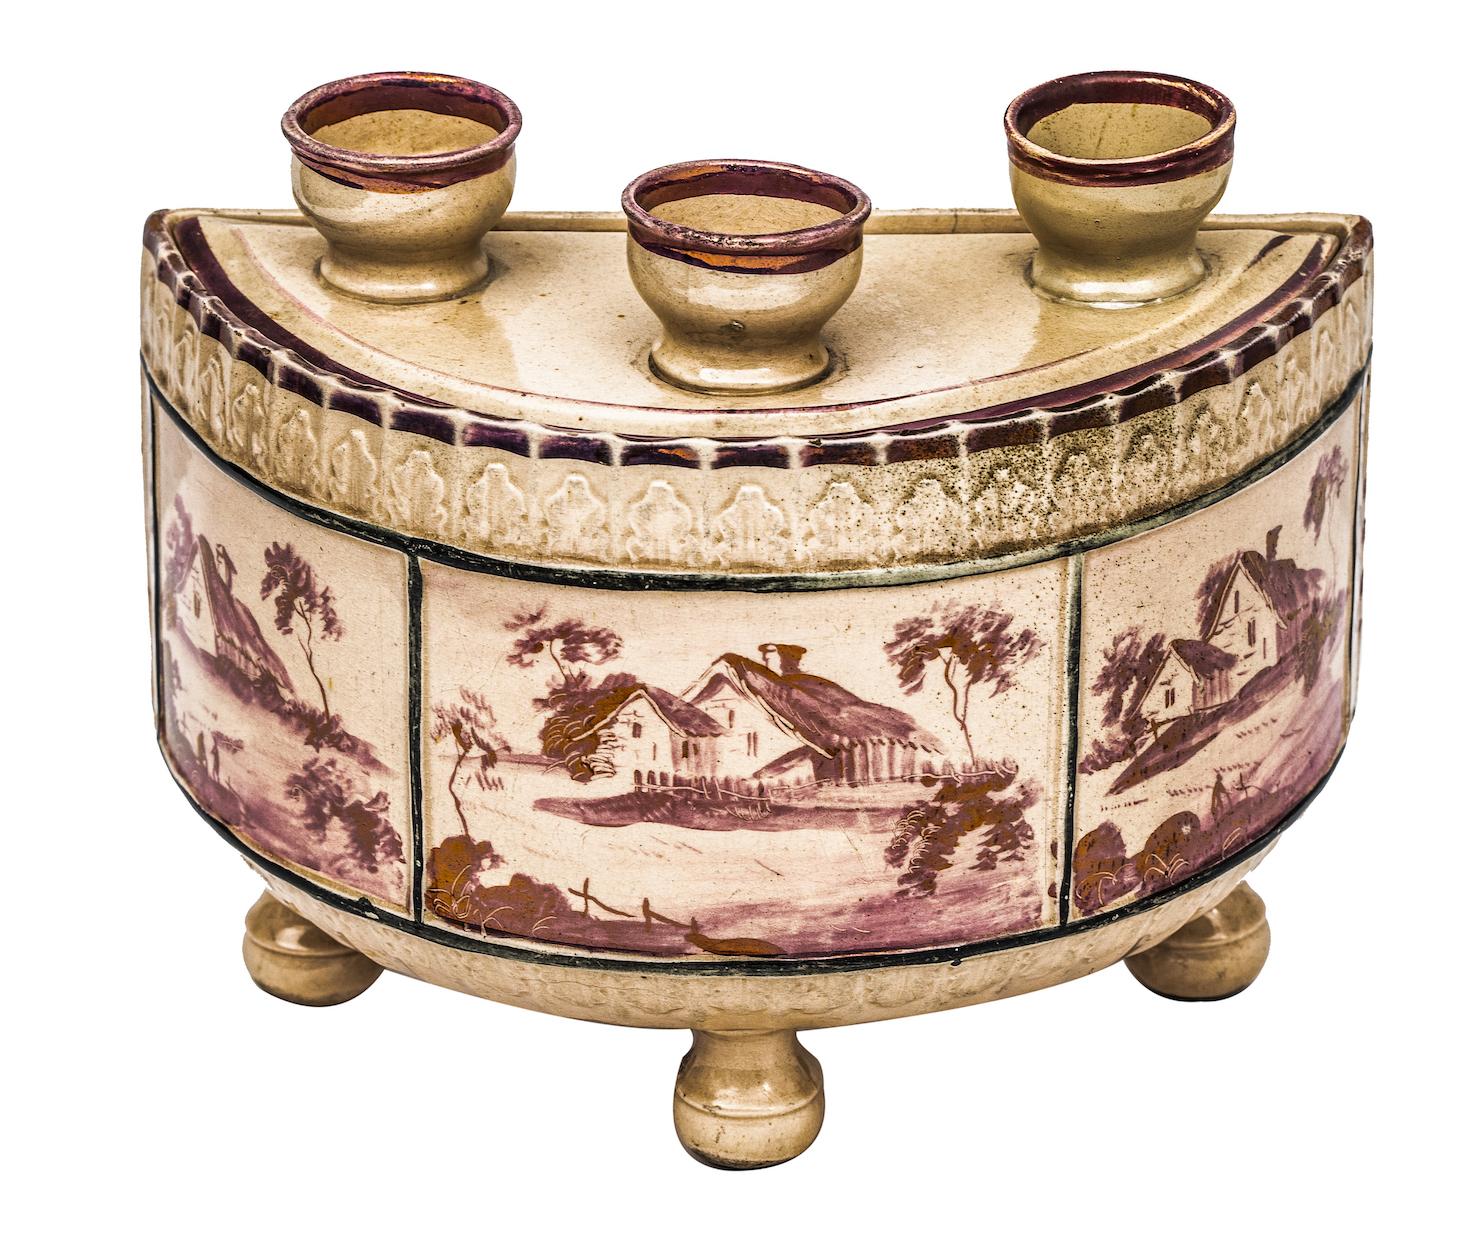 This demilune flower pot or bough pot for forcing springtime bulbs, is adorned with three landscape panels. Each panel, painted in pink lustre, depicts the same cottage in a pastoral setting from three different vantage points. Moulded into the top